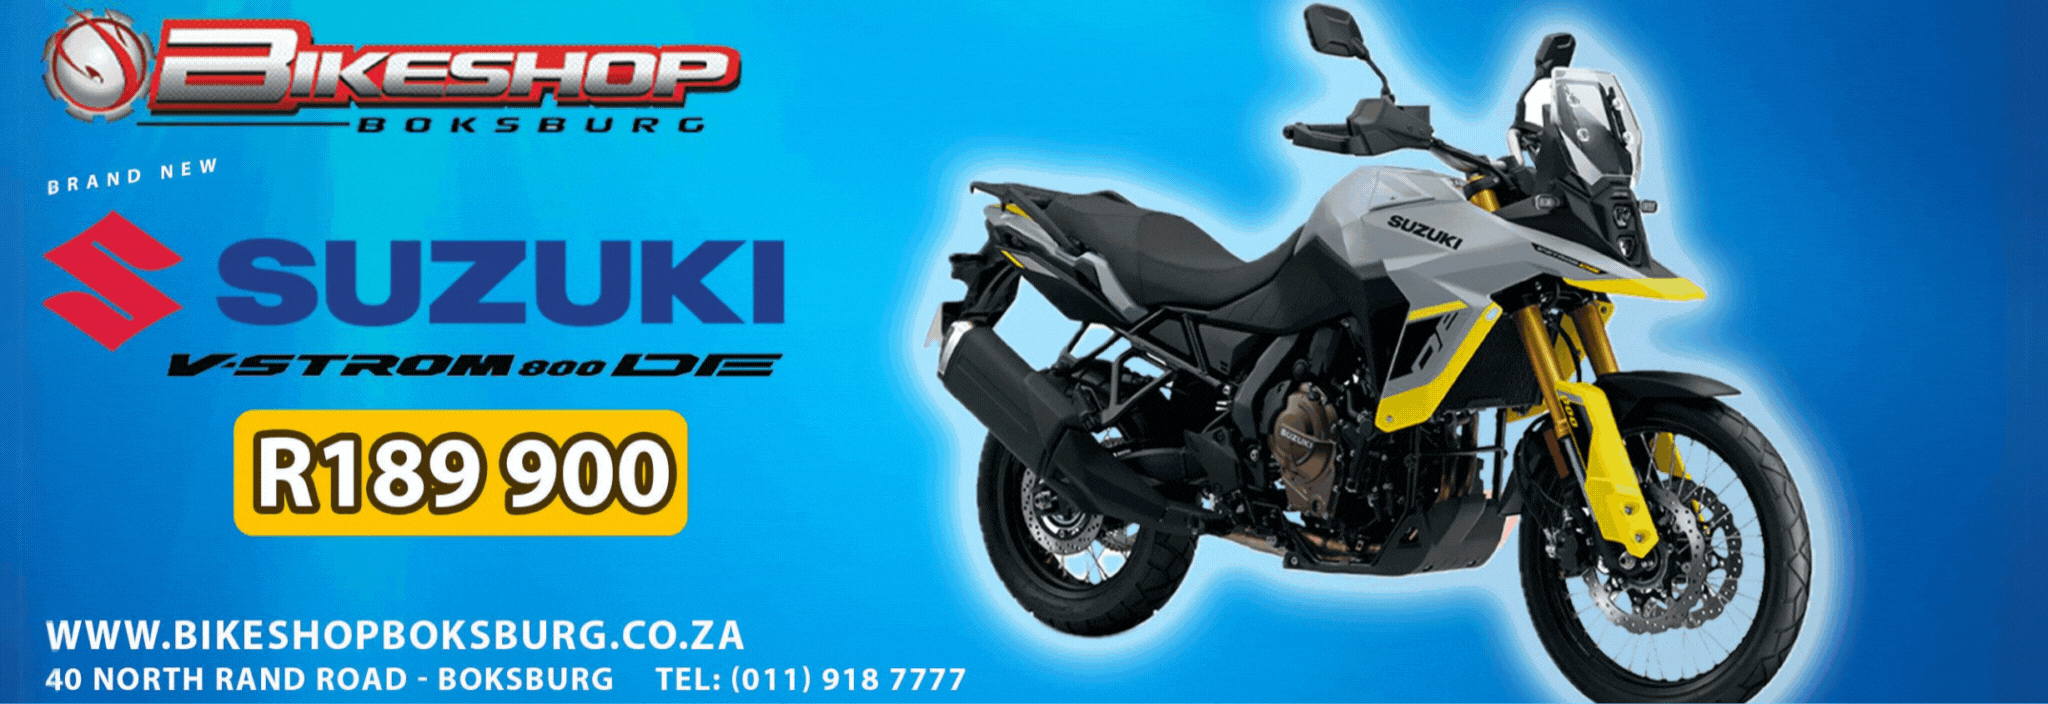 SUZUKI MOTORCYCLES FOR SALE PARTS WORKSHOP FINANCE TRADE INS USED MOTORCYCLES GAUTENG EAST RAND